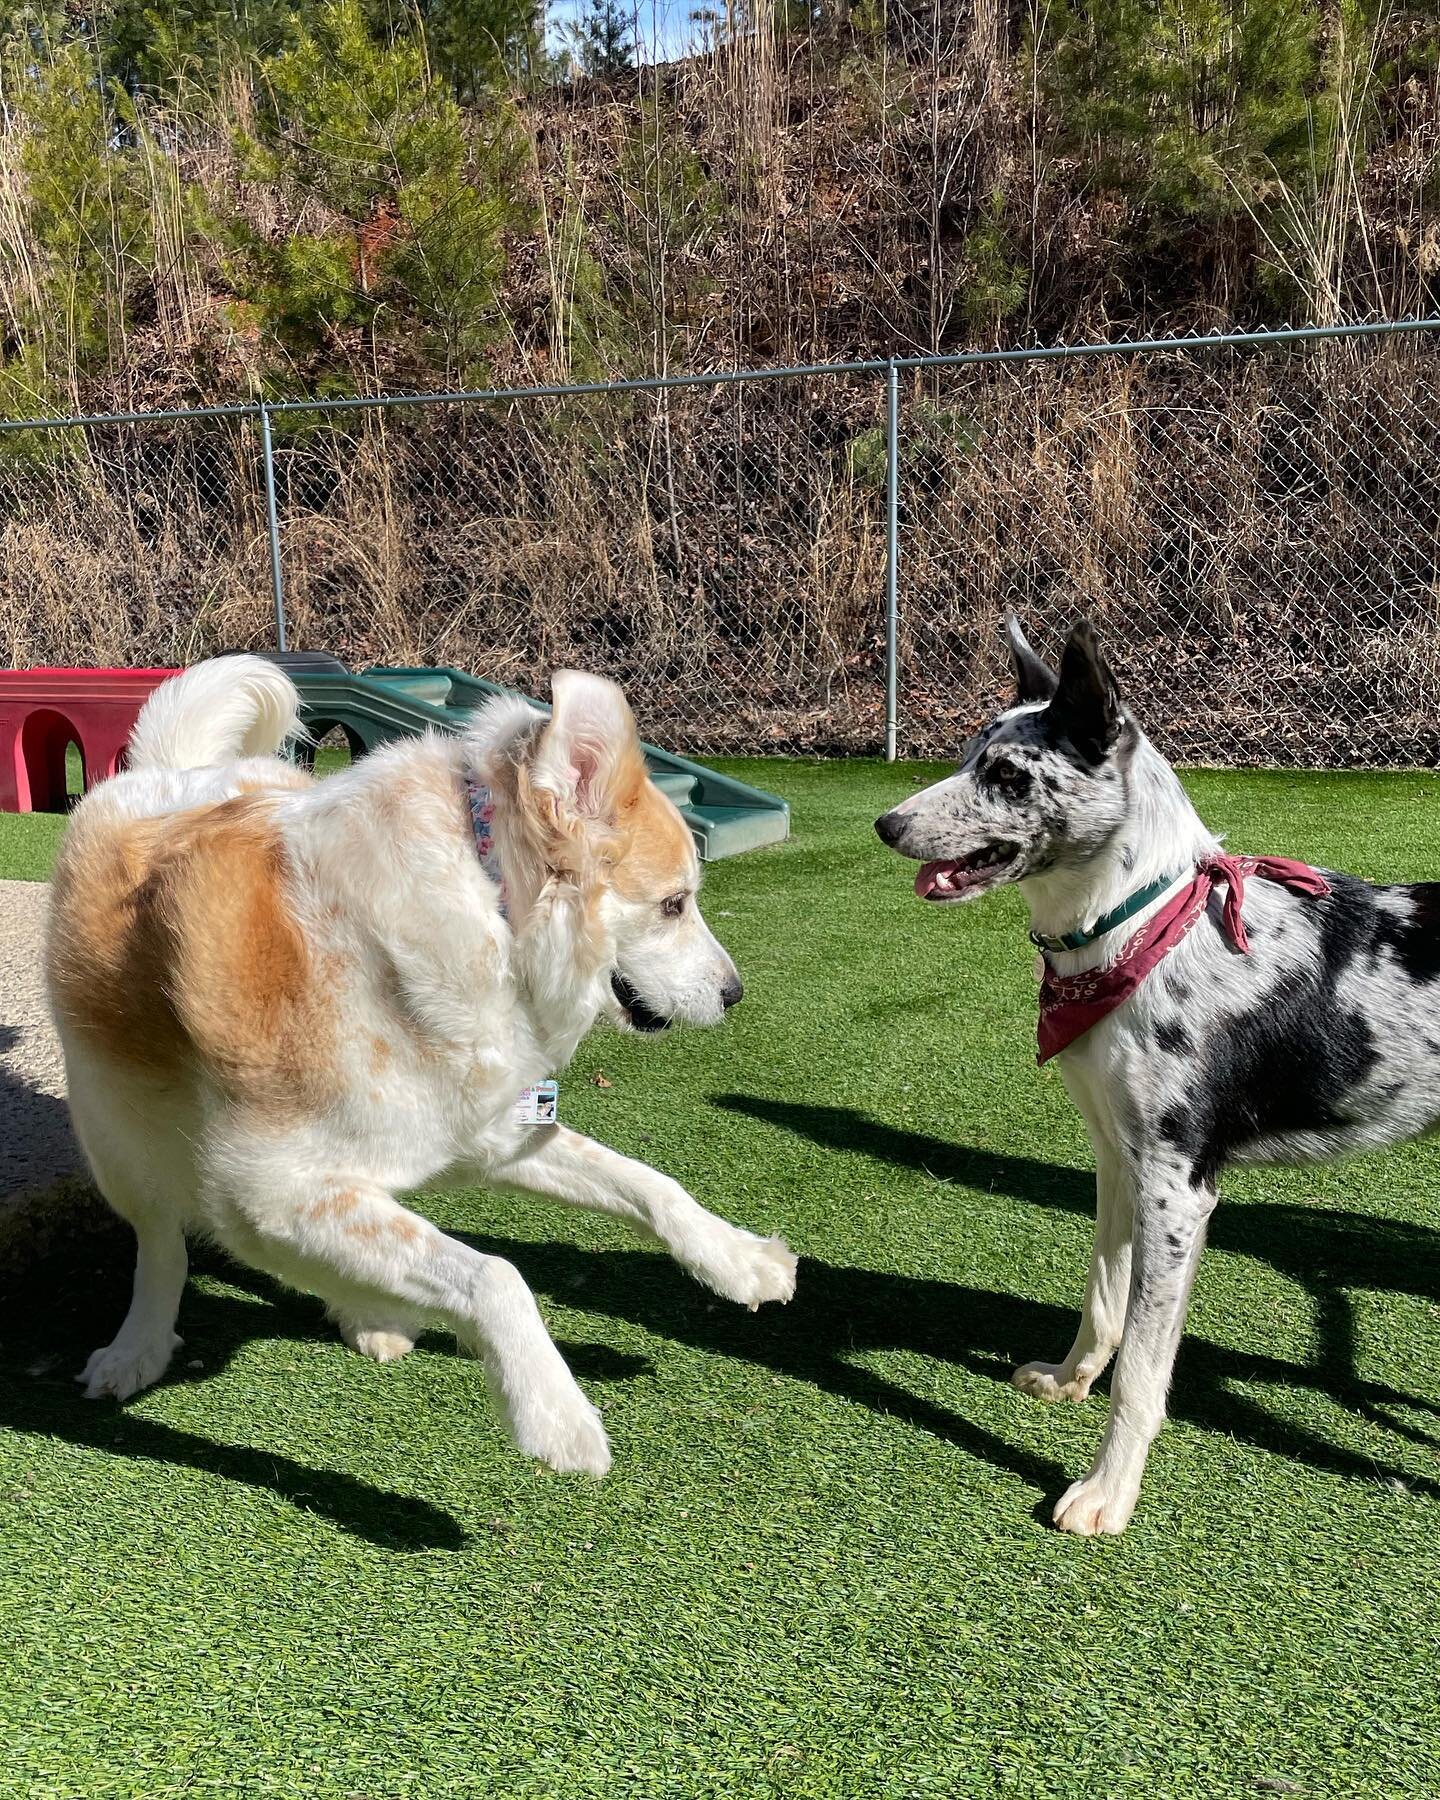 ✨The joy of new friendship✨. Laredo and new member Emma enjoy a moment of one on one playtime